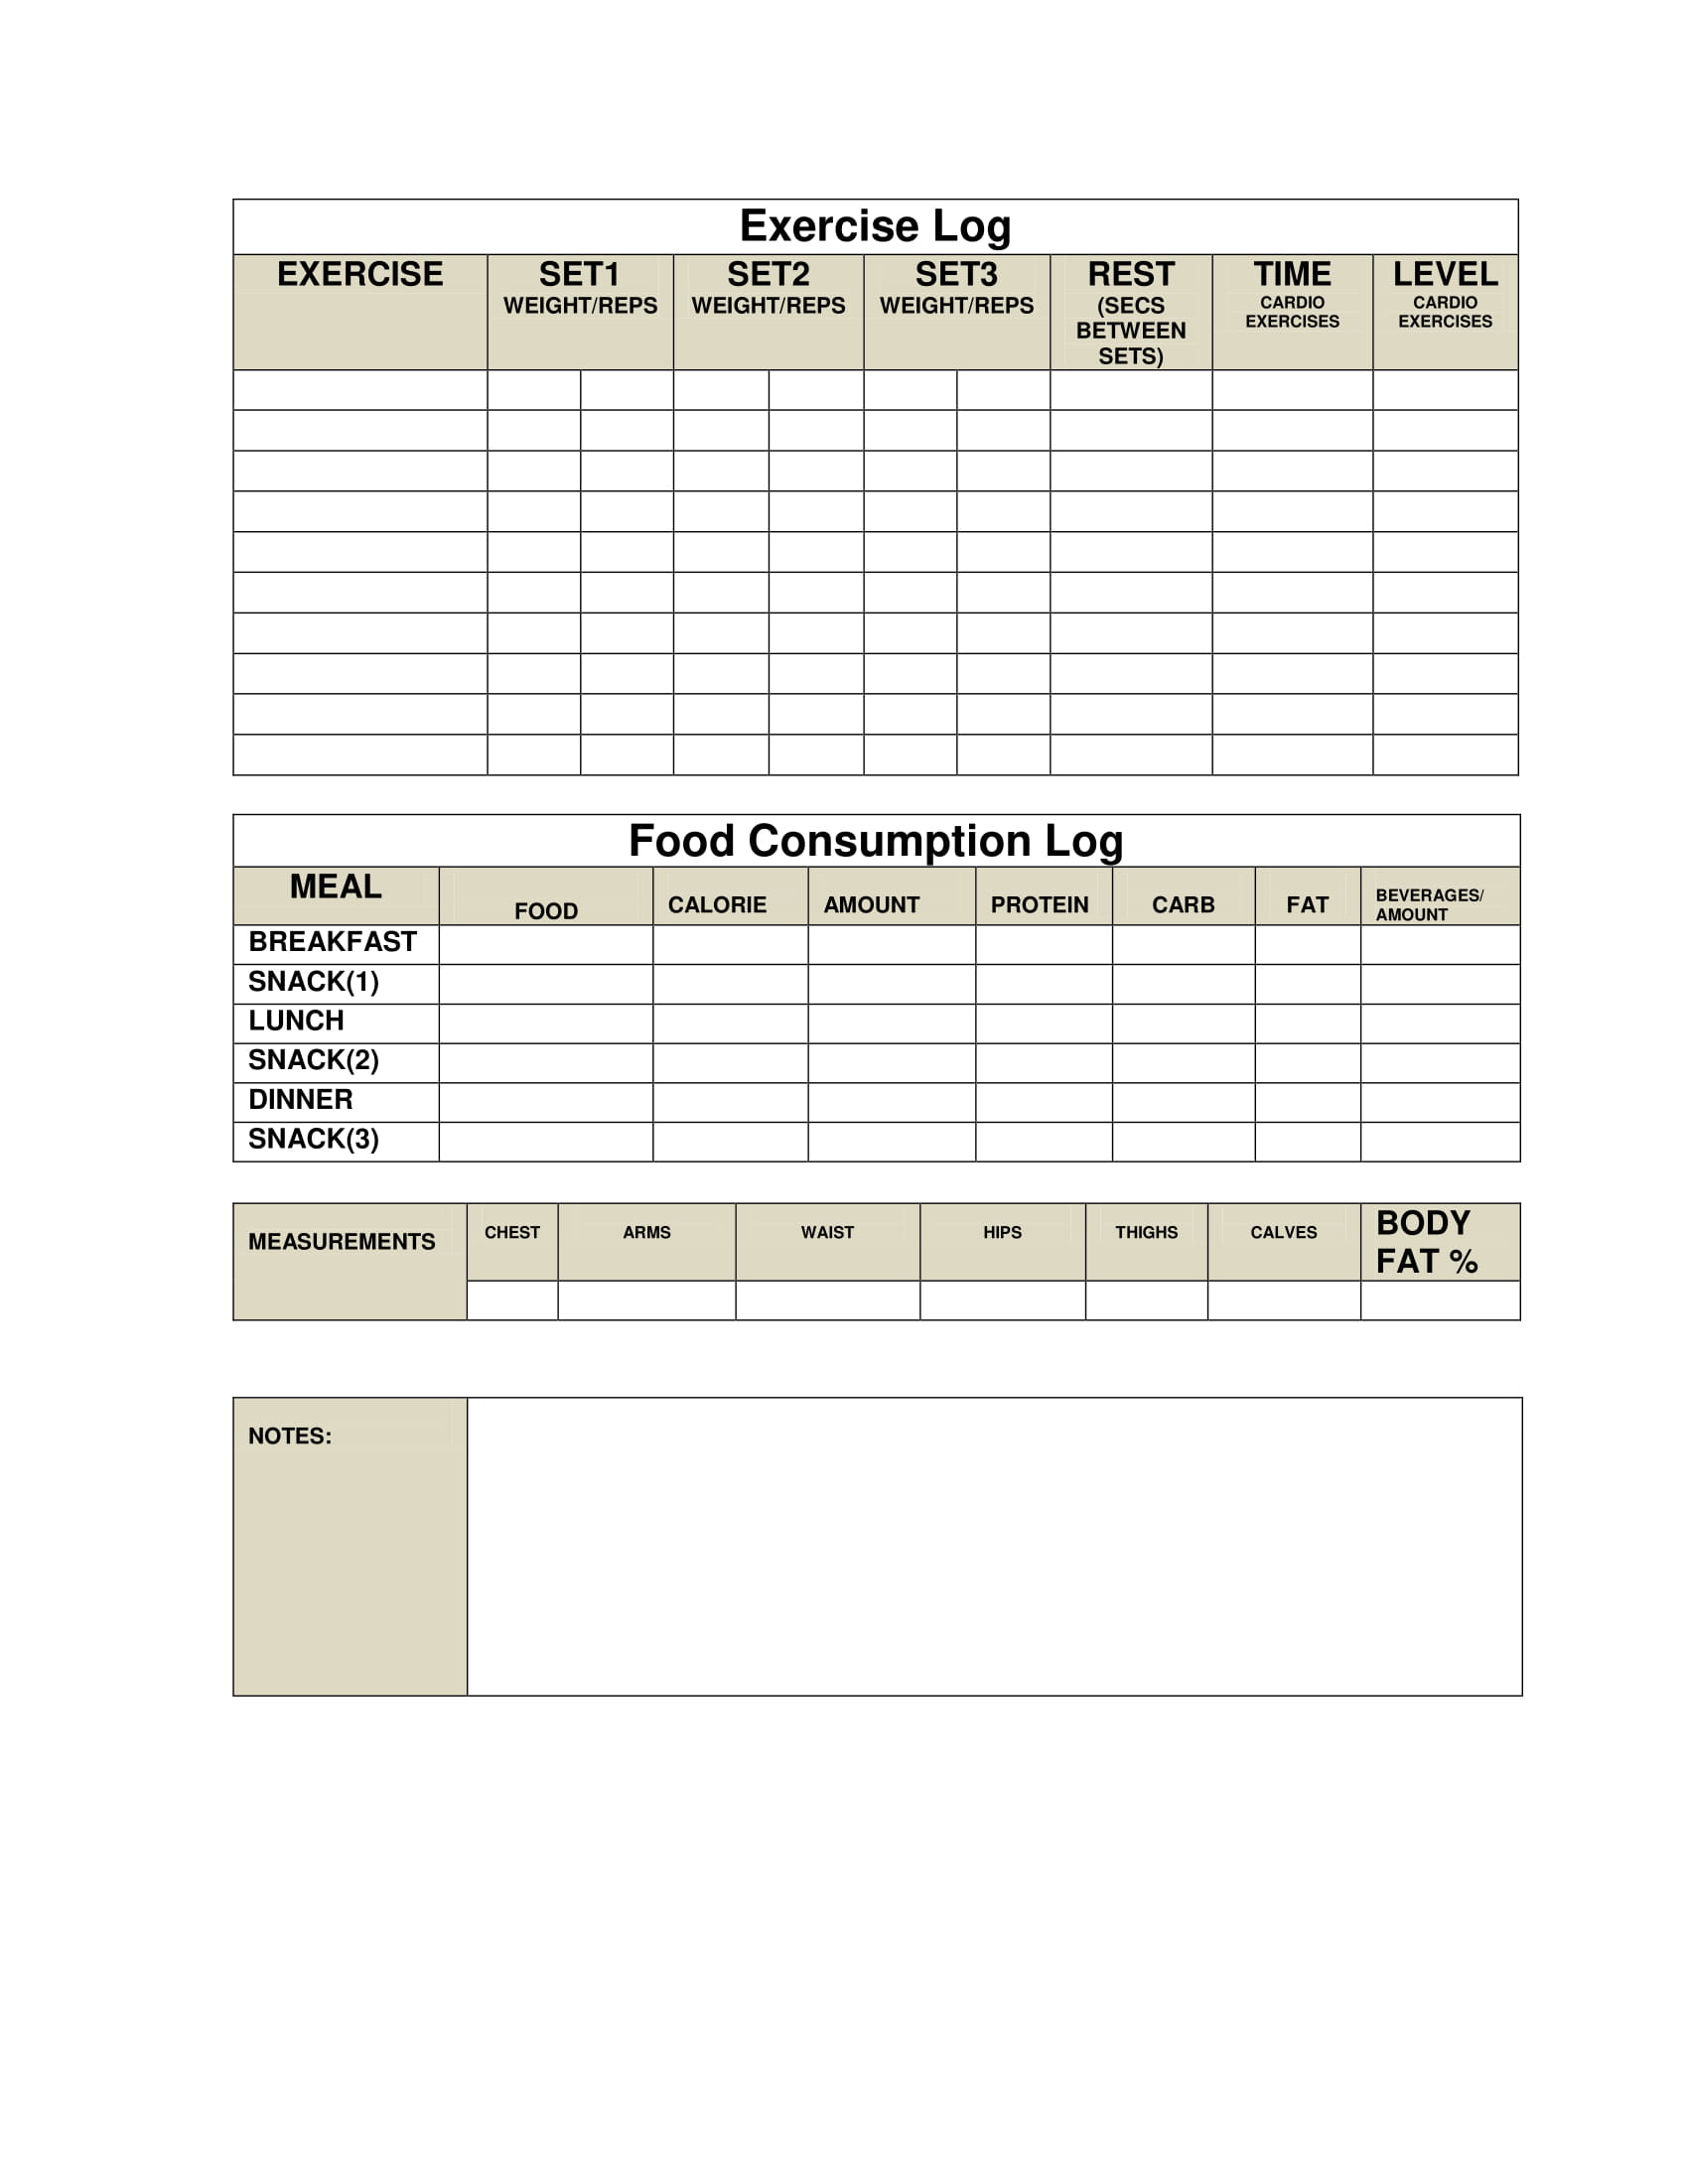 Exercise and food log sheet you can download and print. 